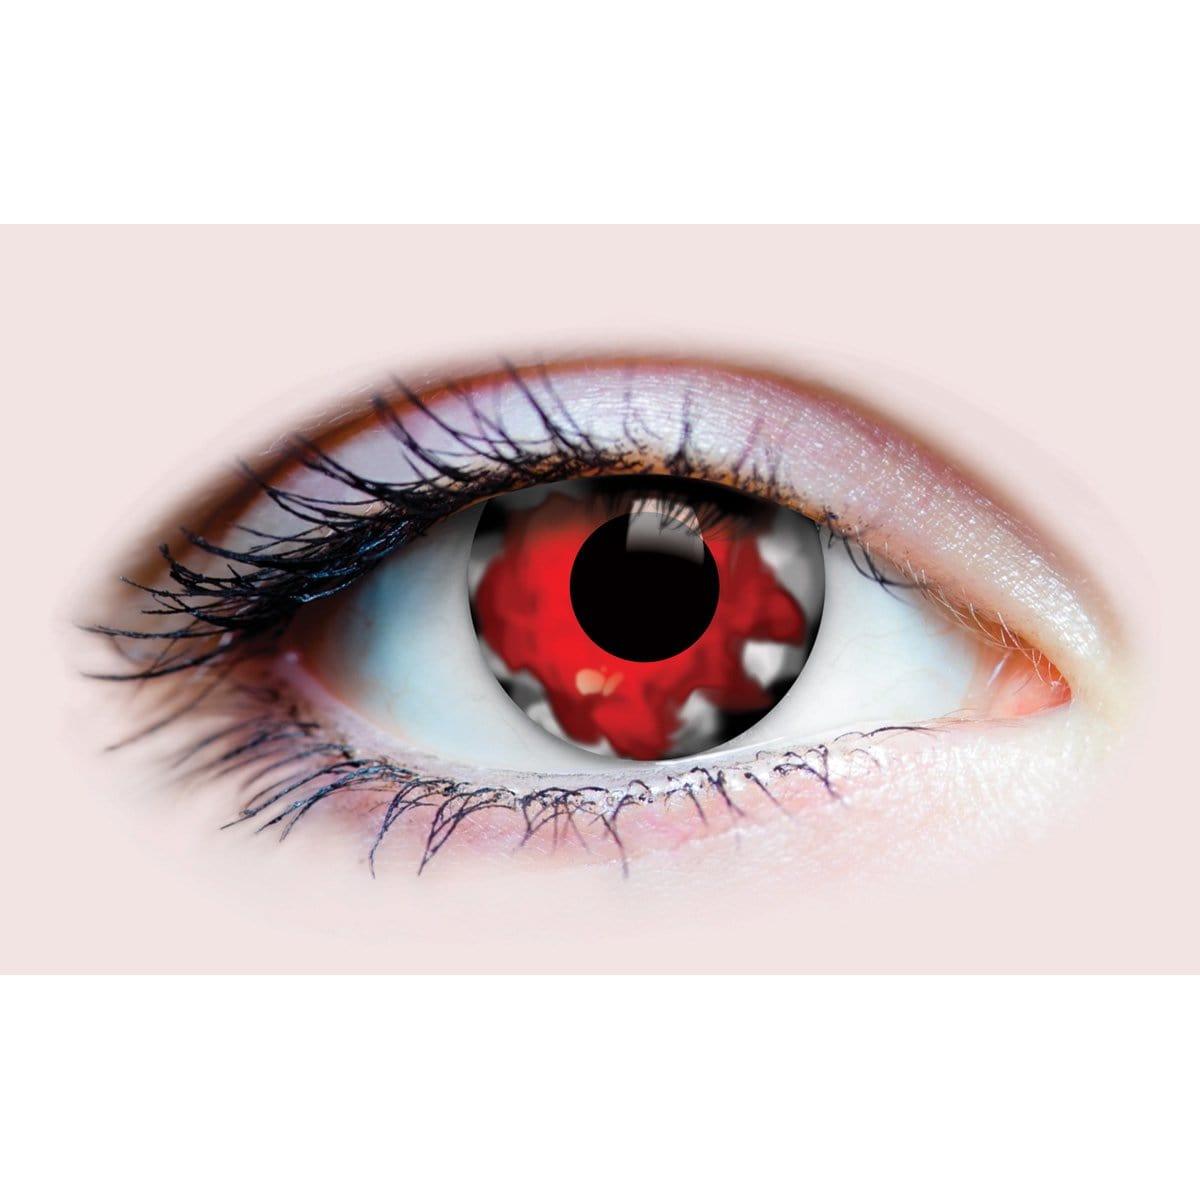 Buy Costume Accessories Walking dead II contact lenses, 3 months usage sold at Party Expert